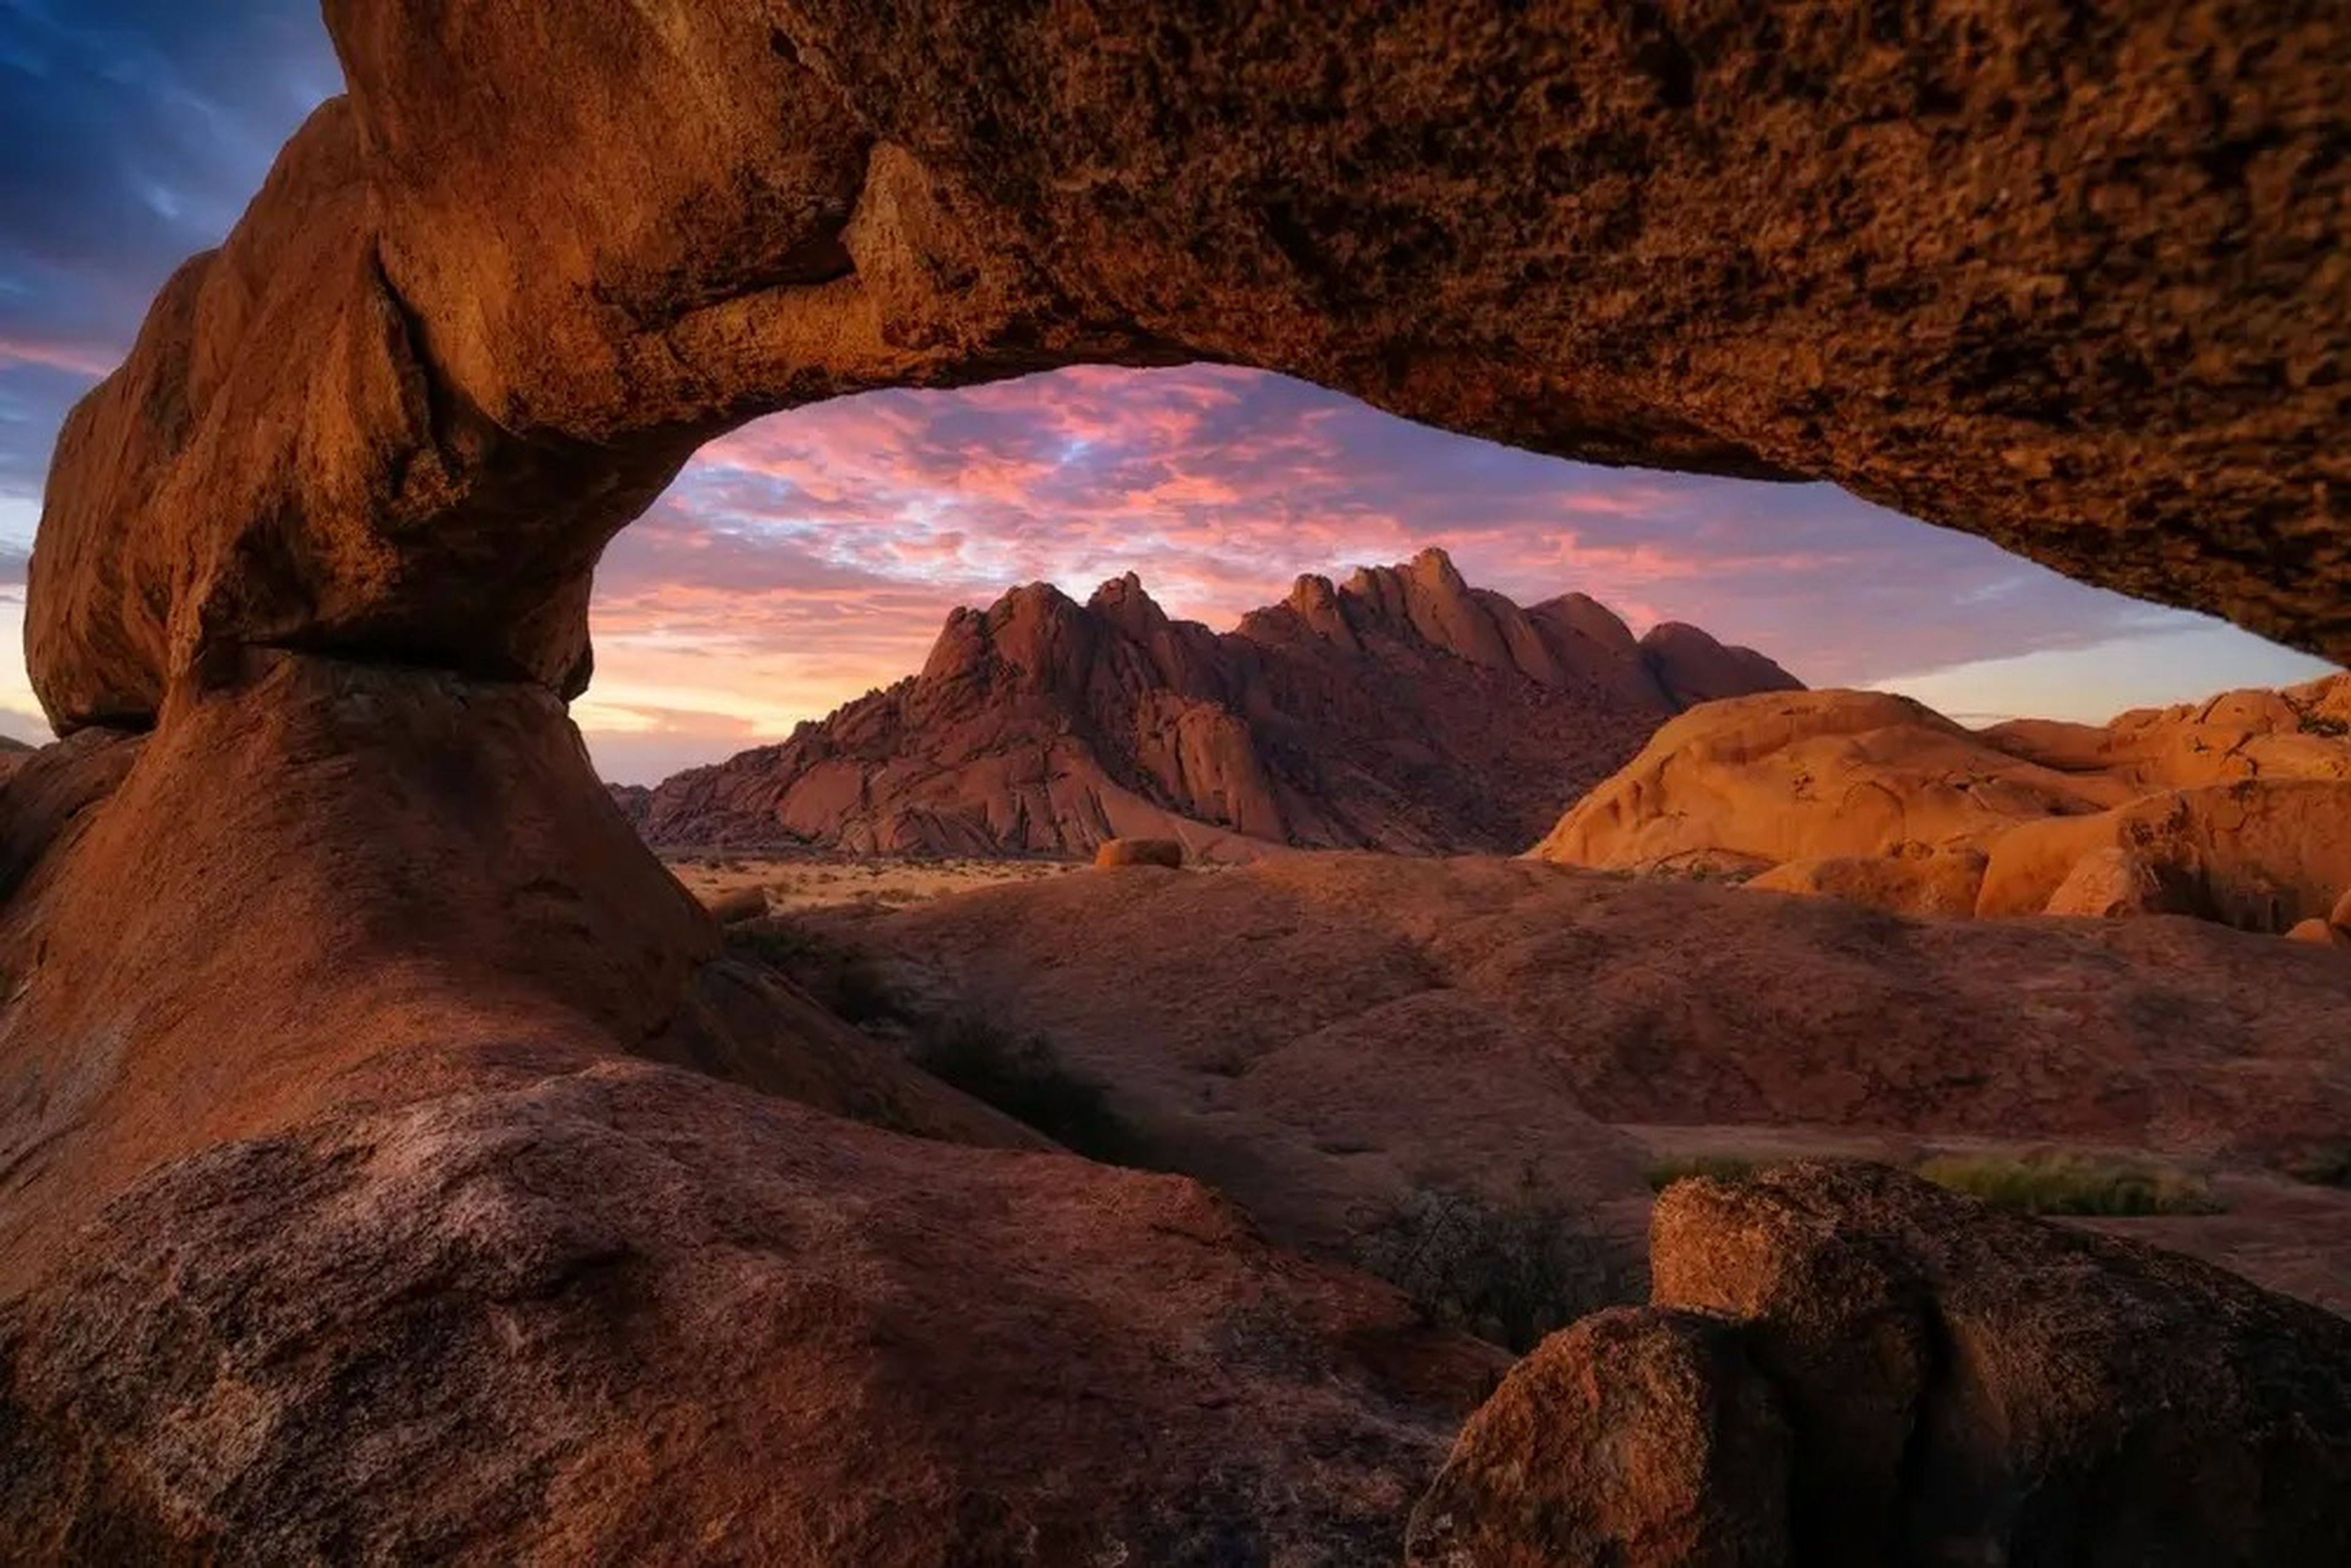 Rock arch at sunset in Spitzkoppe, Namibia, Africa.